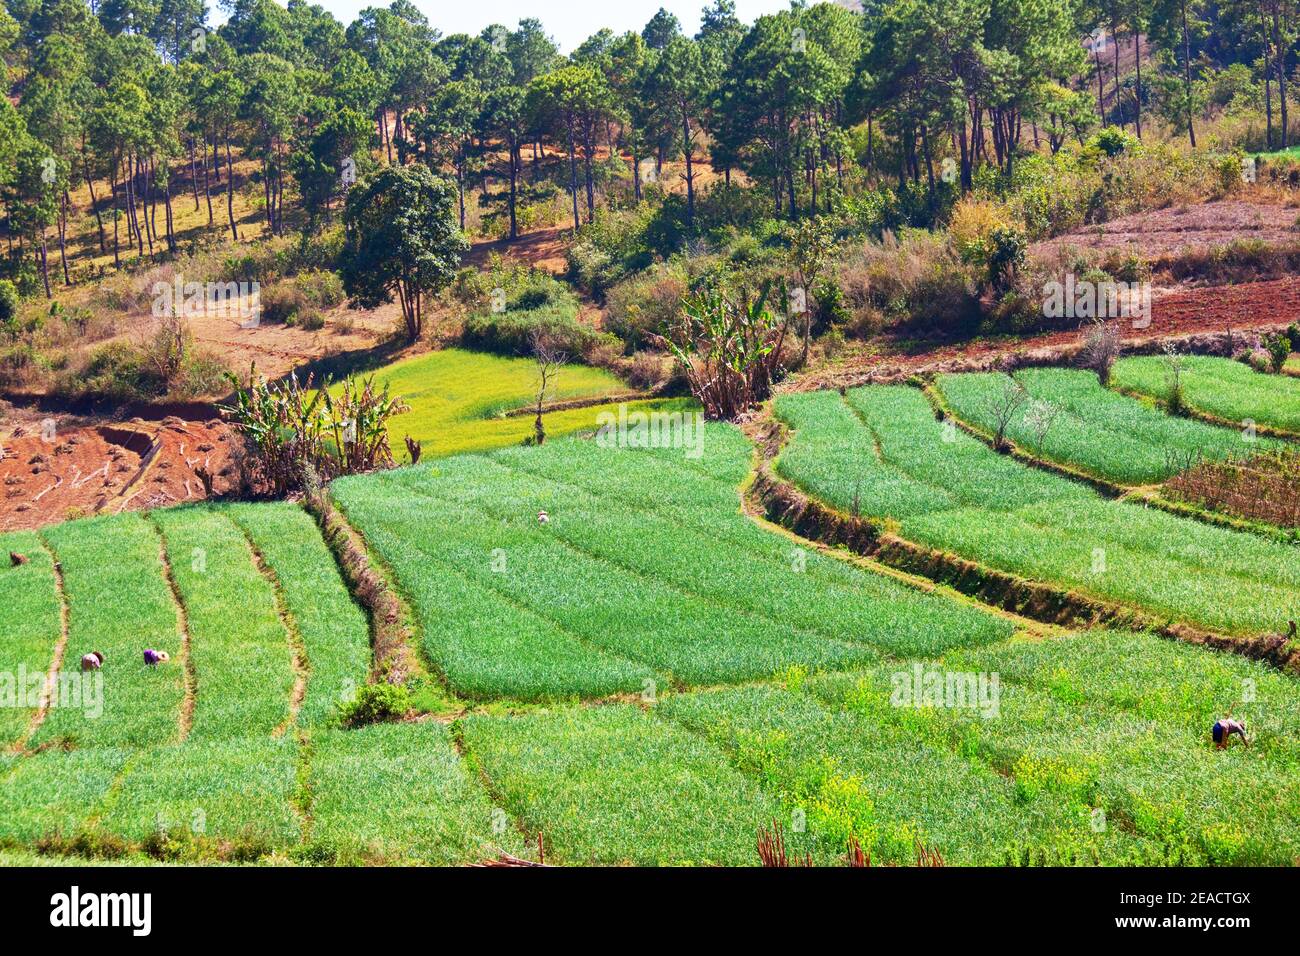 Small rice plants in a breeding field glow in a bright green color in Myanmar Stock Photo